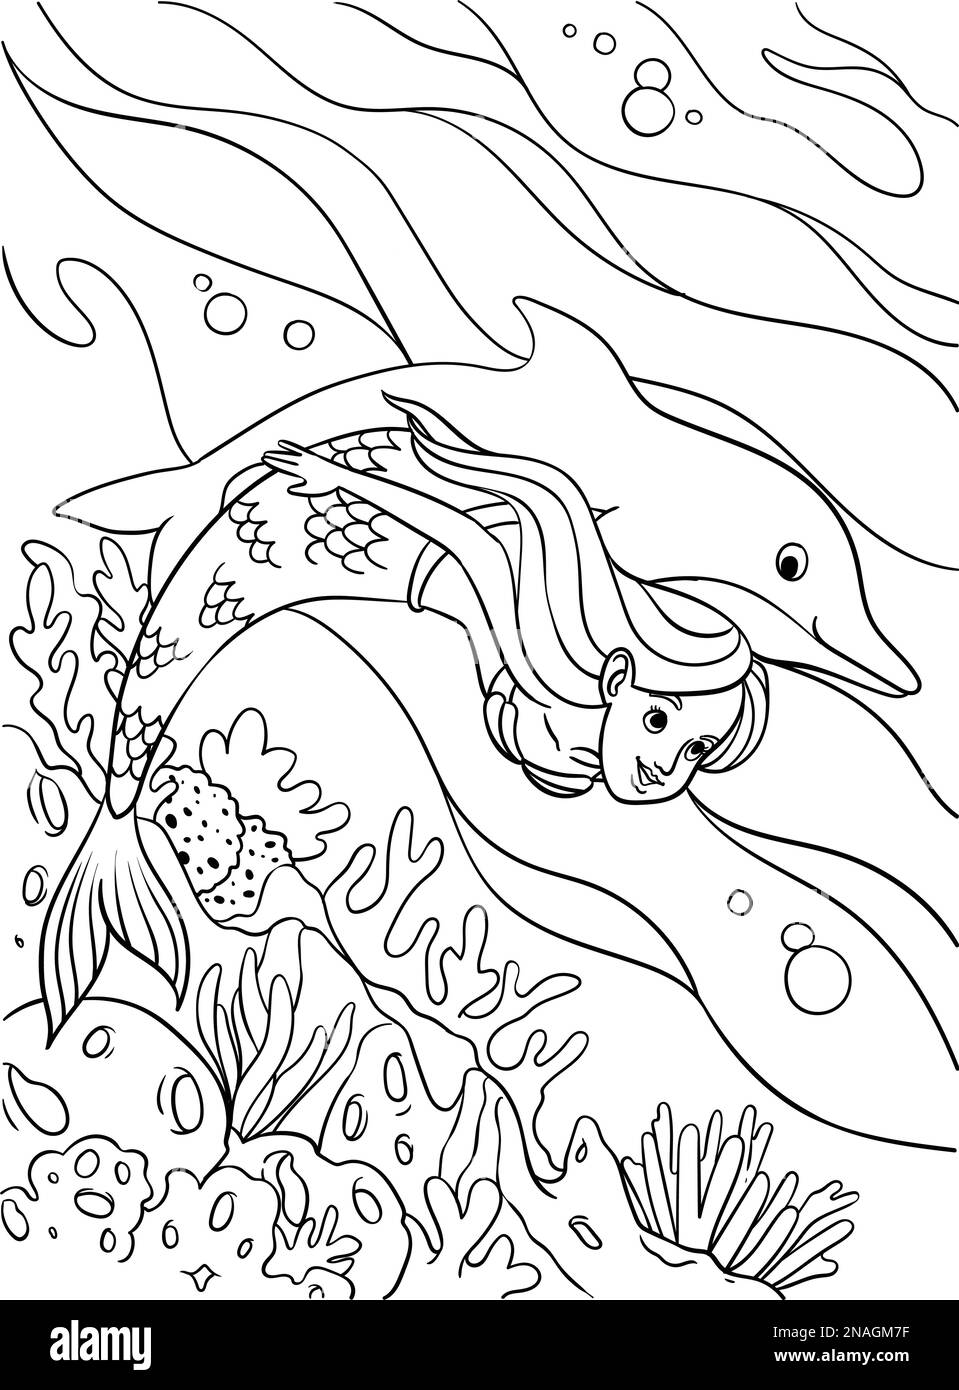 Under the Sea: How to Draw Books for Kids with Dolphins, Mermaids